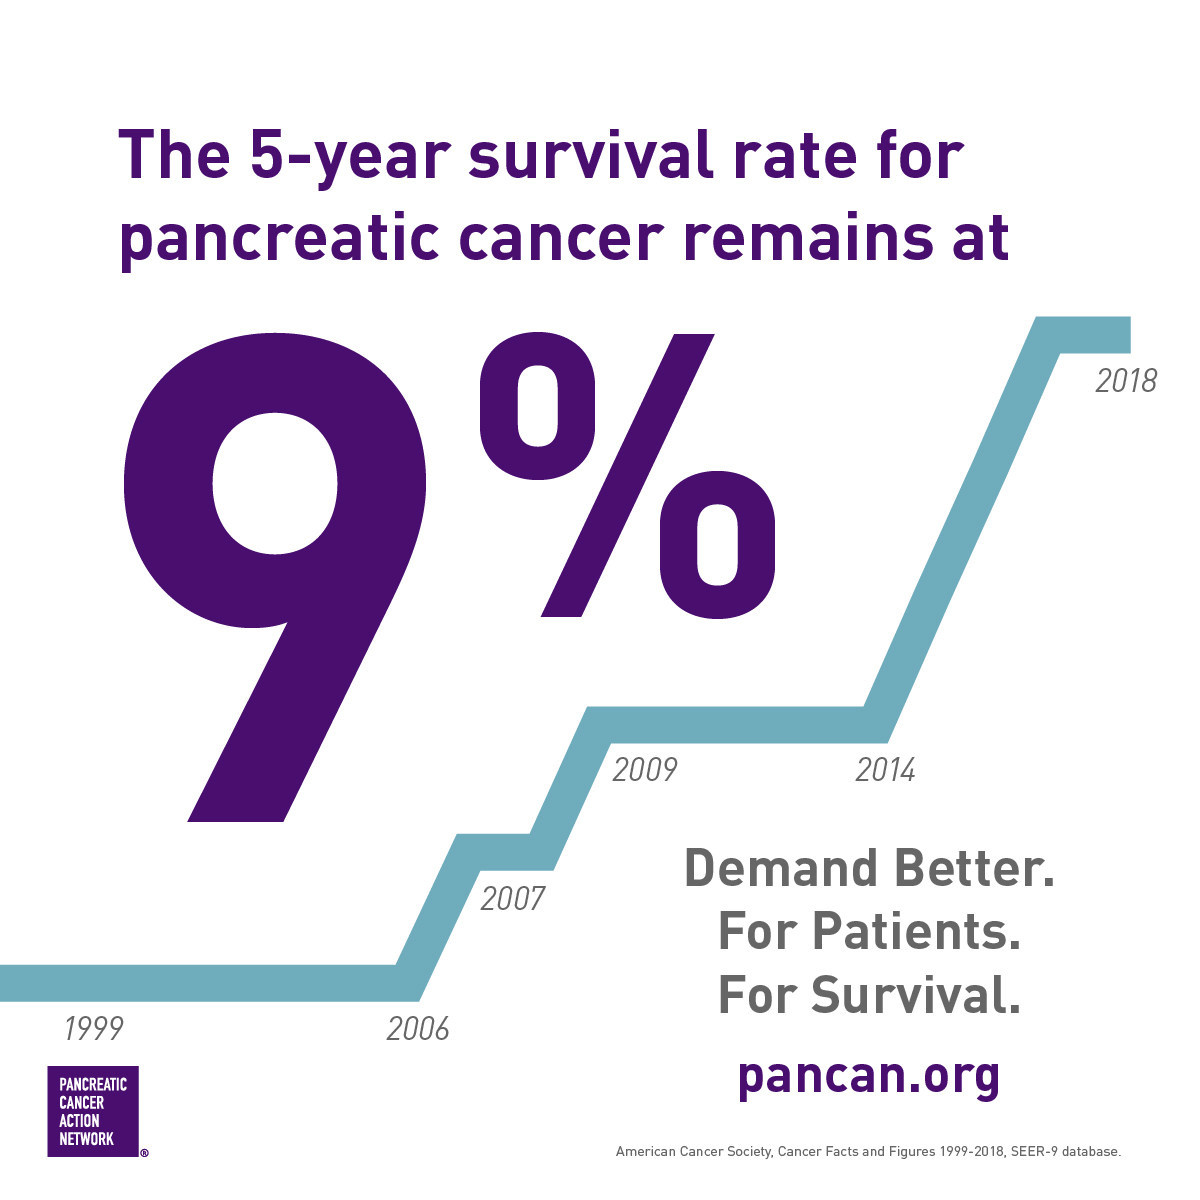 Pancreatic Cancer Action Network Survival Rate Infographic ?p=publish